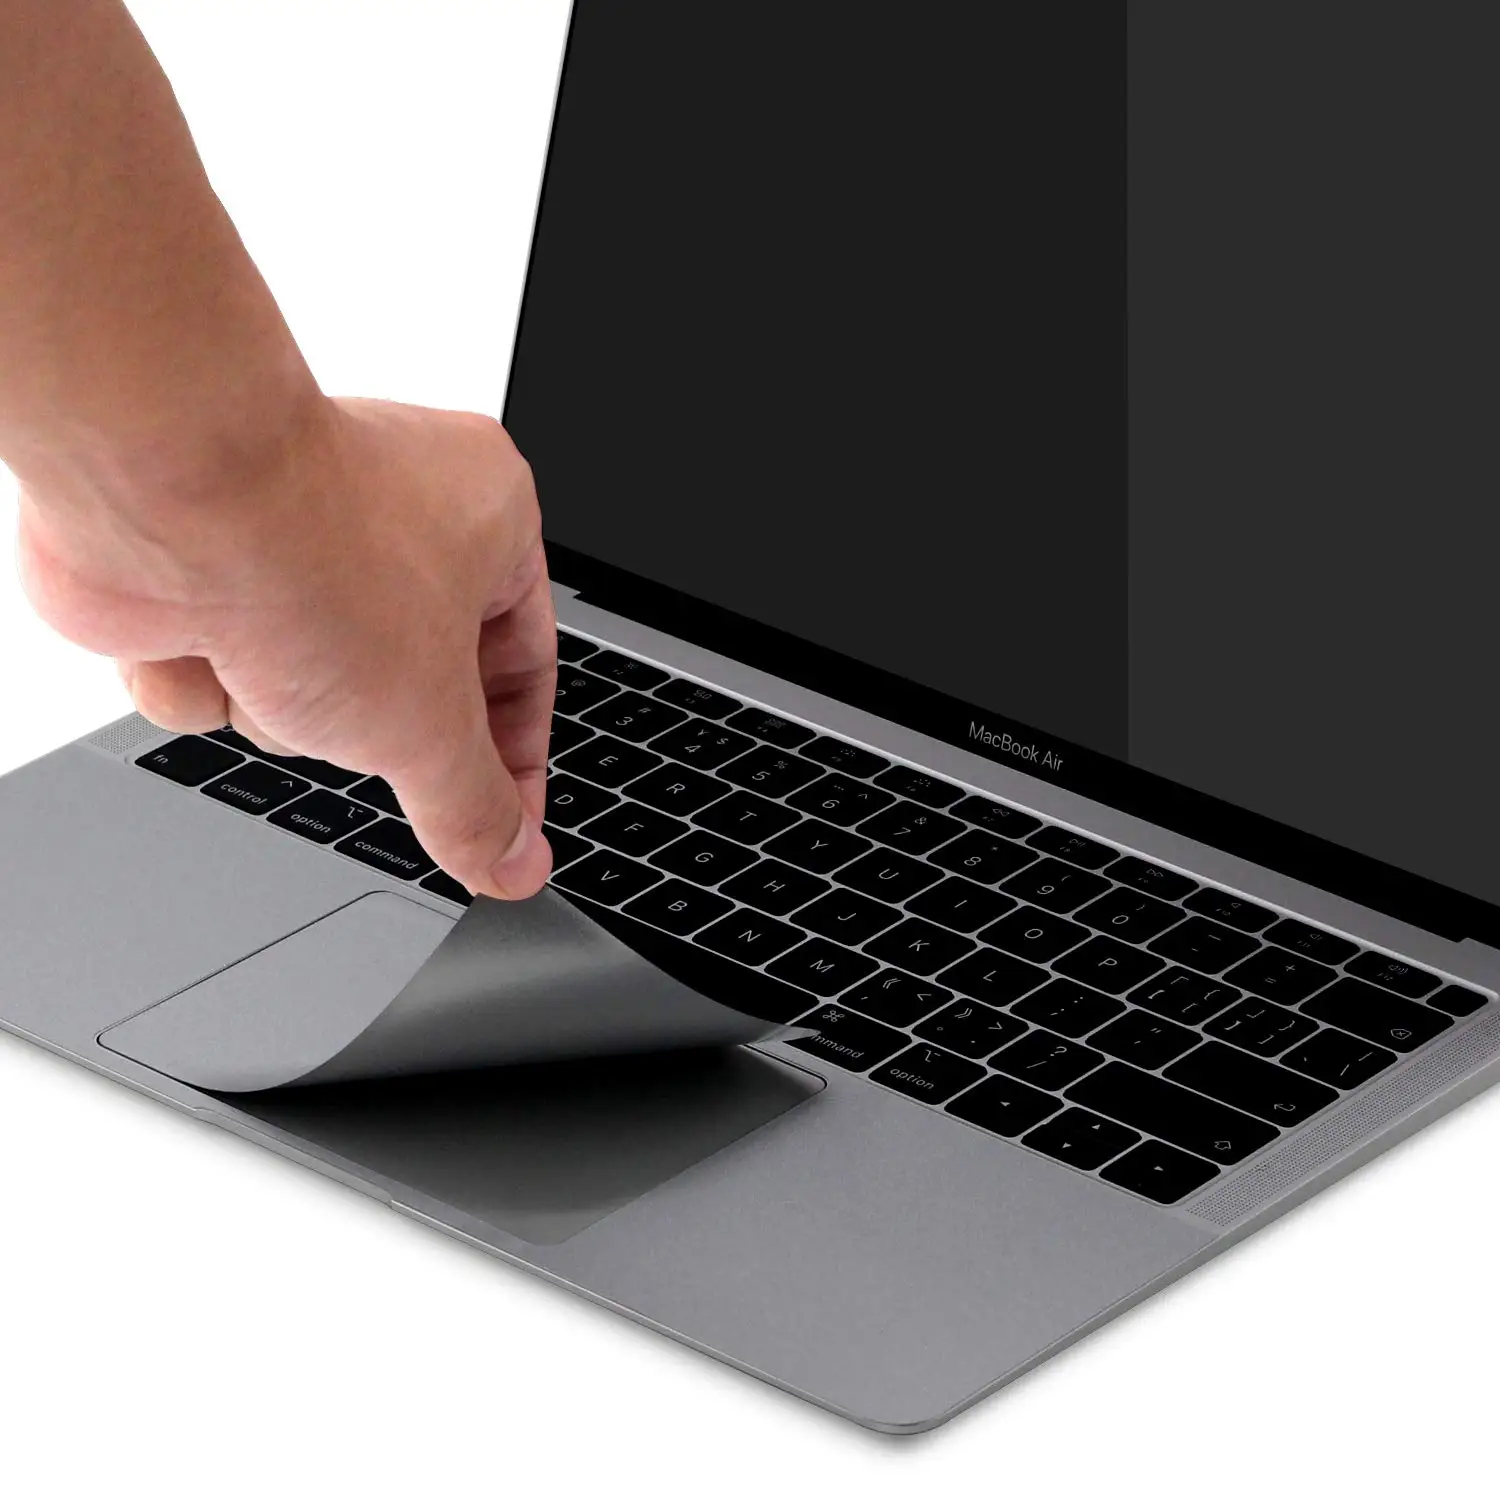 LENTION Palm Rest Skin Trackpad Protector Sticker for 2018 MacBook Air 13 A1932 